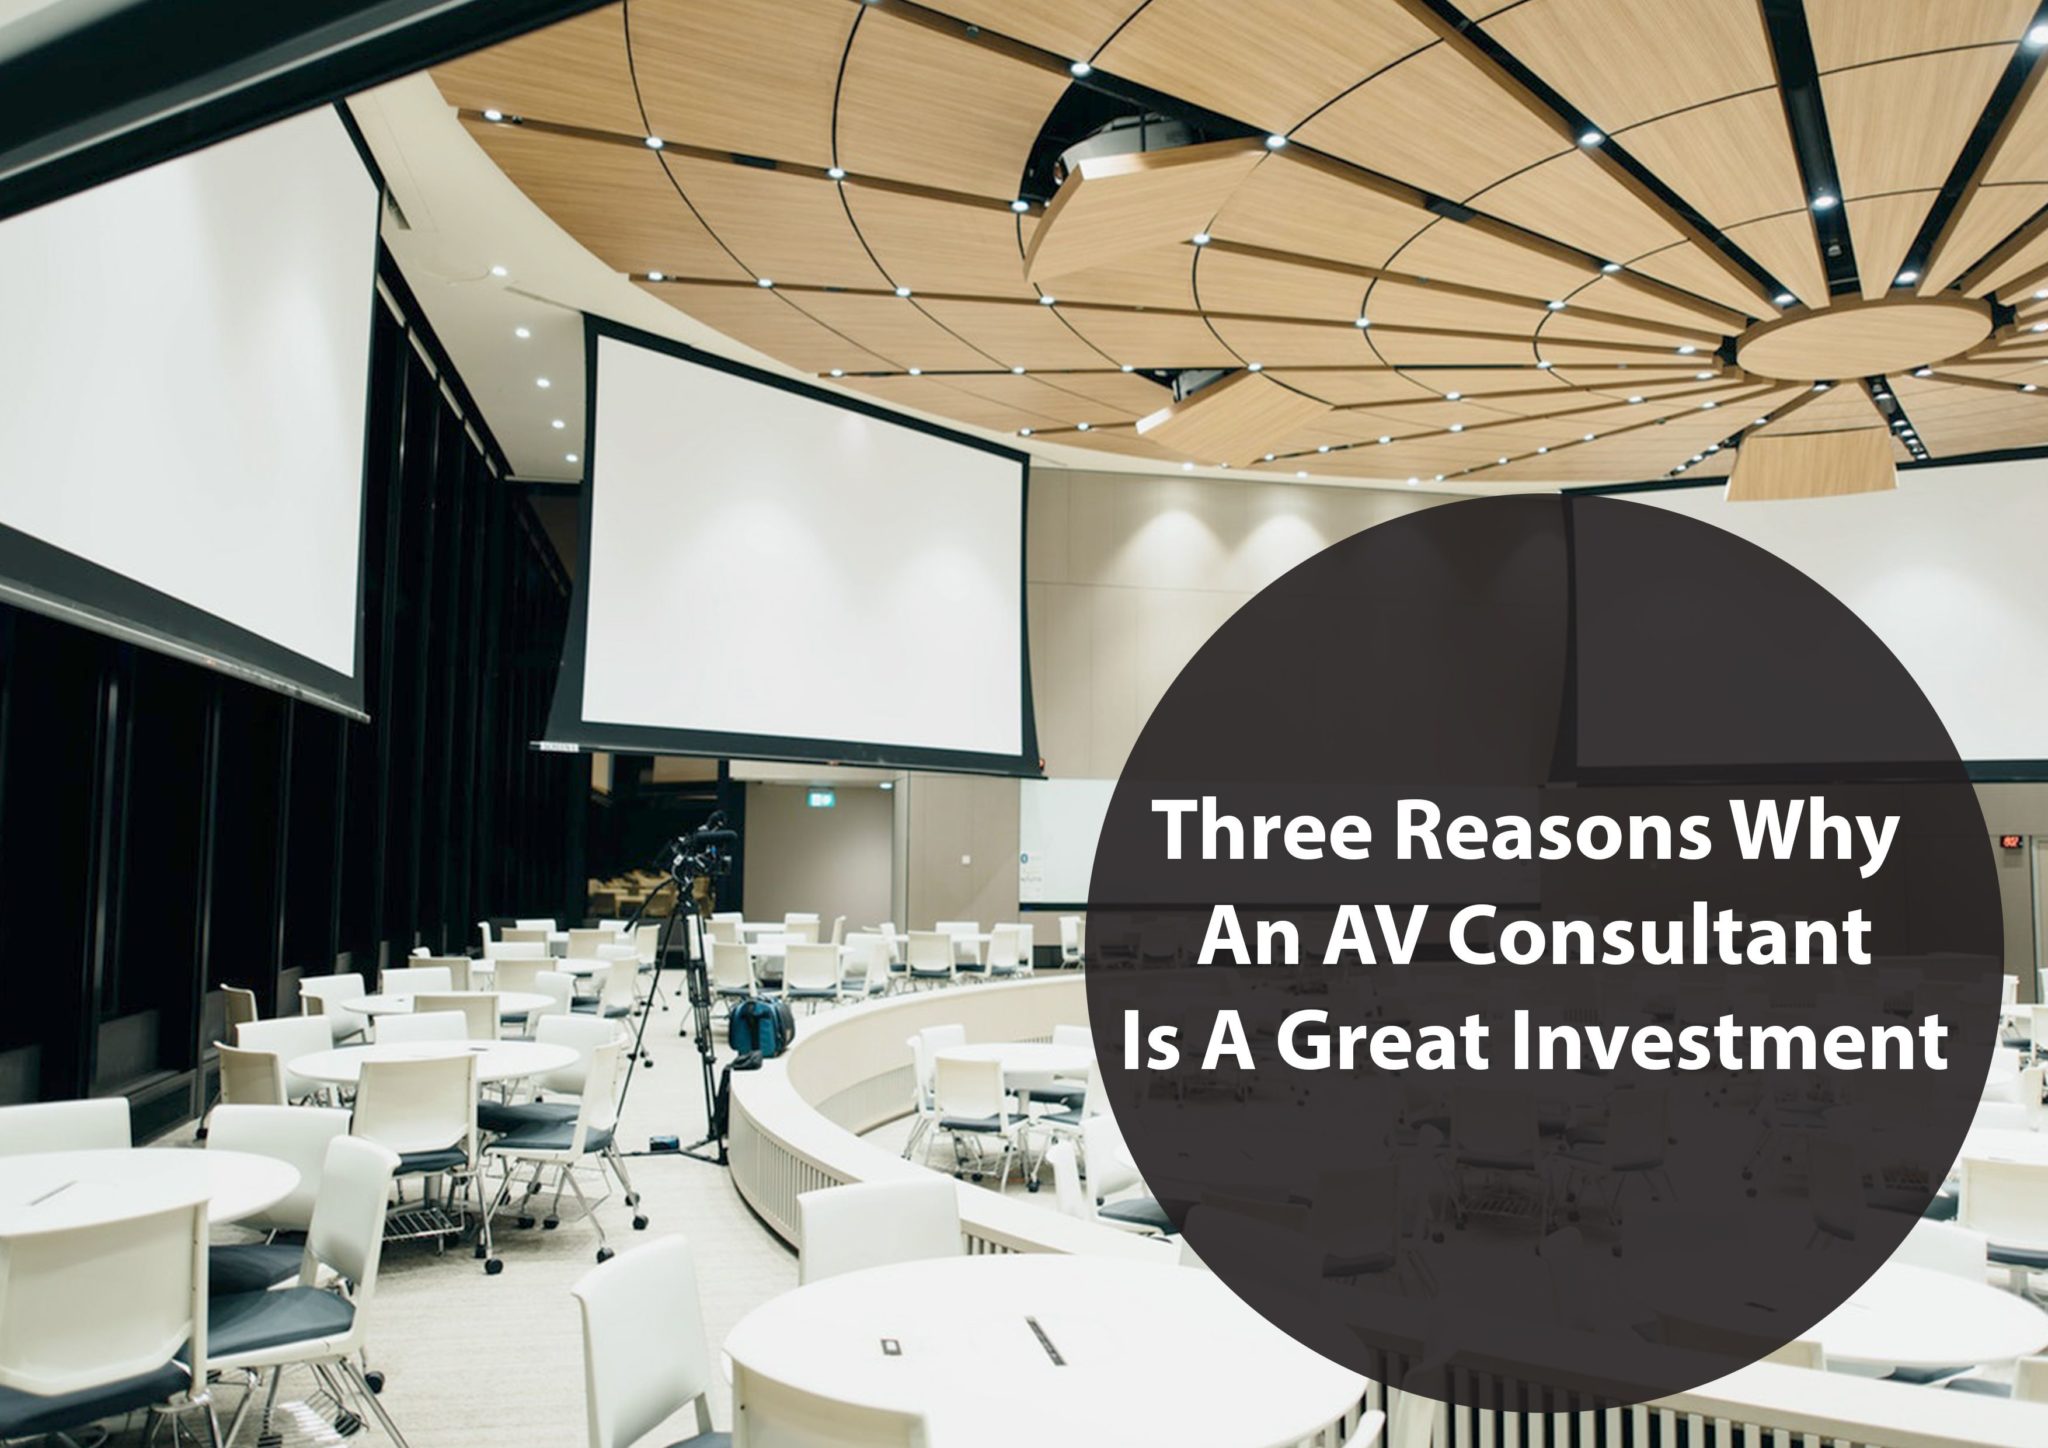 THREE REASONS WHY AN AV CONSULTANT IS A GREAT INVESTMENT